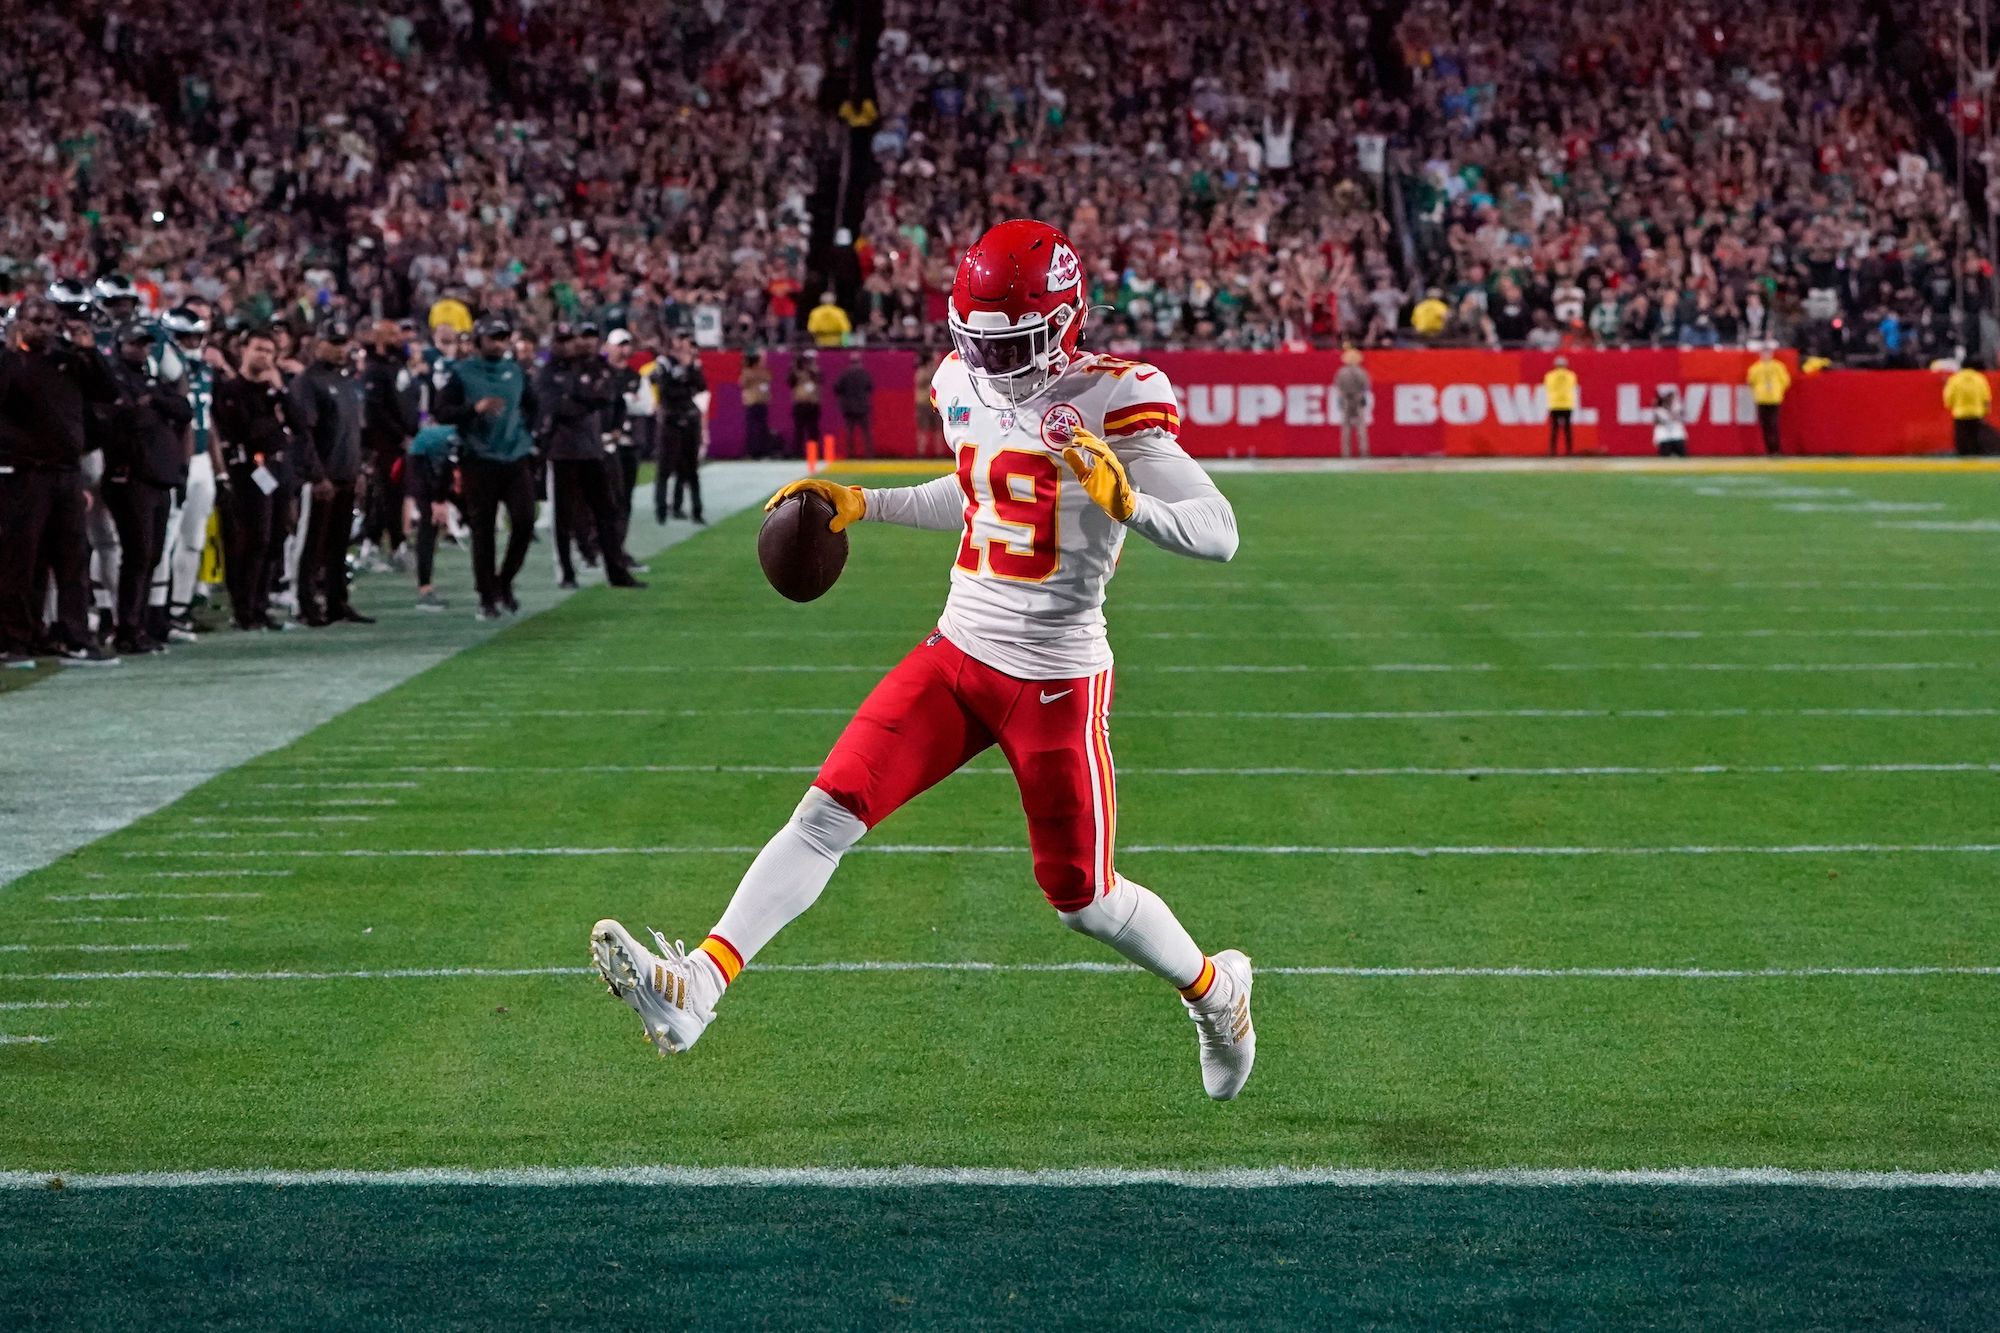 Kansas City Chiefs' wide reciever Kadarius Toney step into the end zone and scores a touchdown during Super Bowl LVII between the Kansas City Chiefs and the Philadelphia Eagles at State Farm Stadium in Glendale, Arizona, on February 12, 2023. (Photo by TIMOTHY A. CLARY / AFP) (Photo by TIMOTHY A. CLARY/AFP via Getty Images)